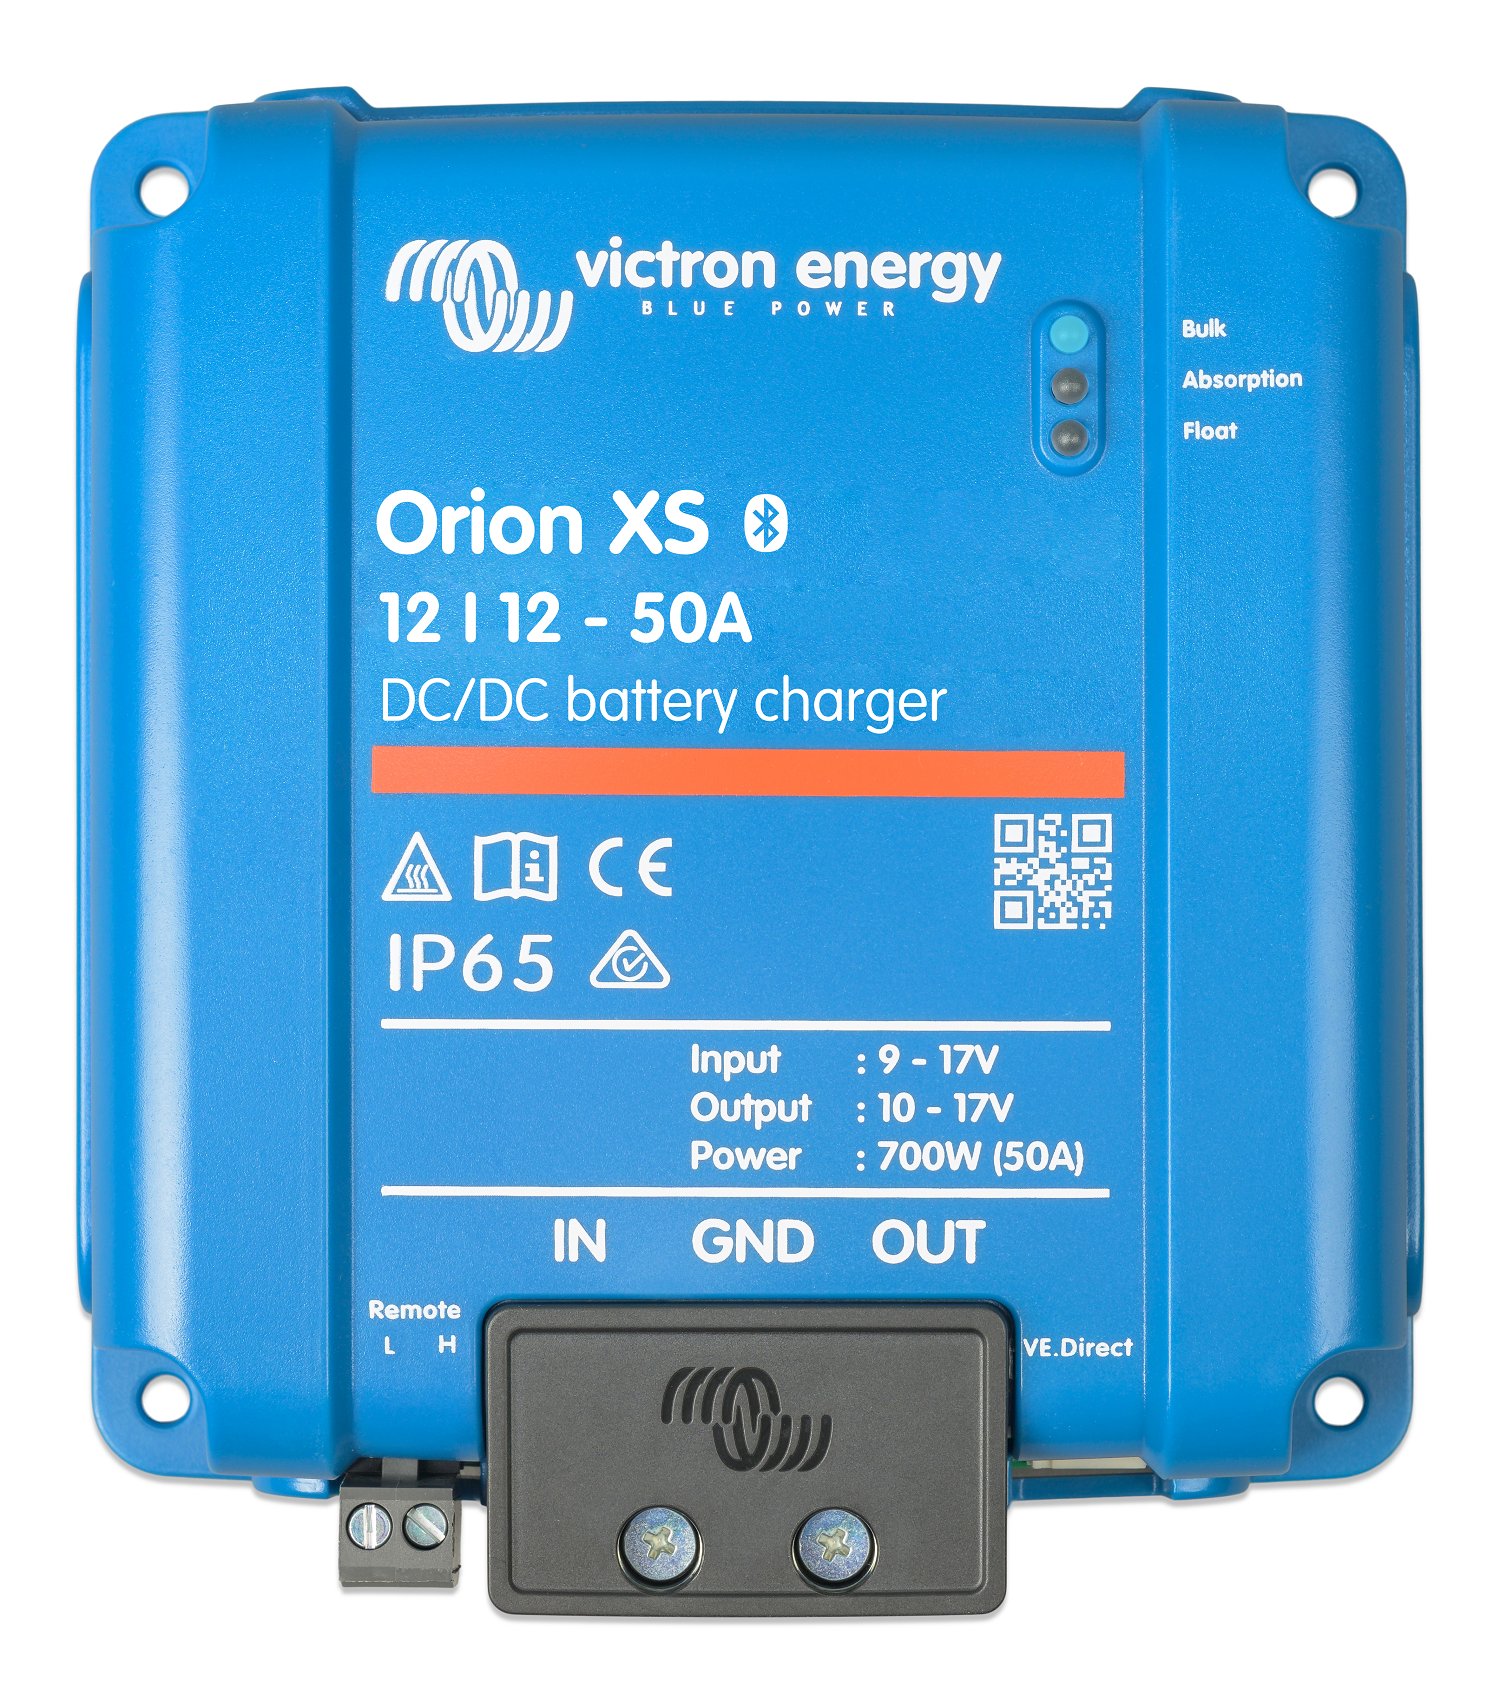 Does Victron Orion XS allow mutual battery bank charging or require two units?